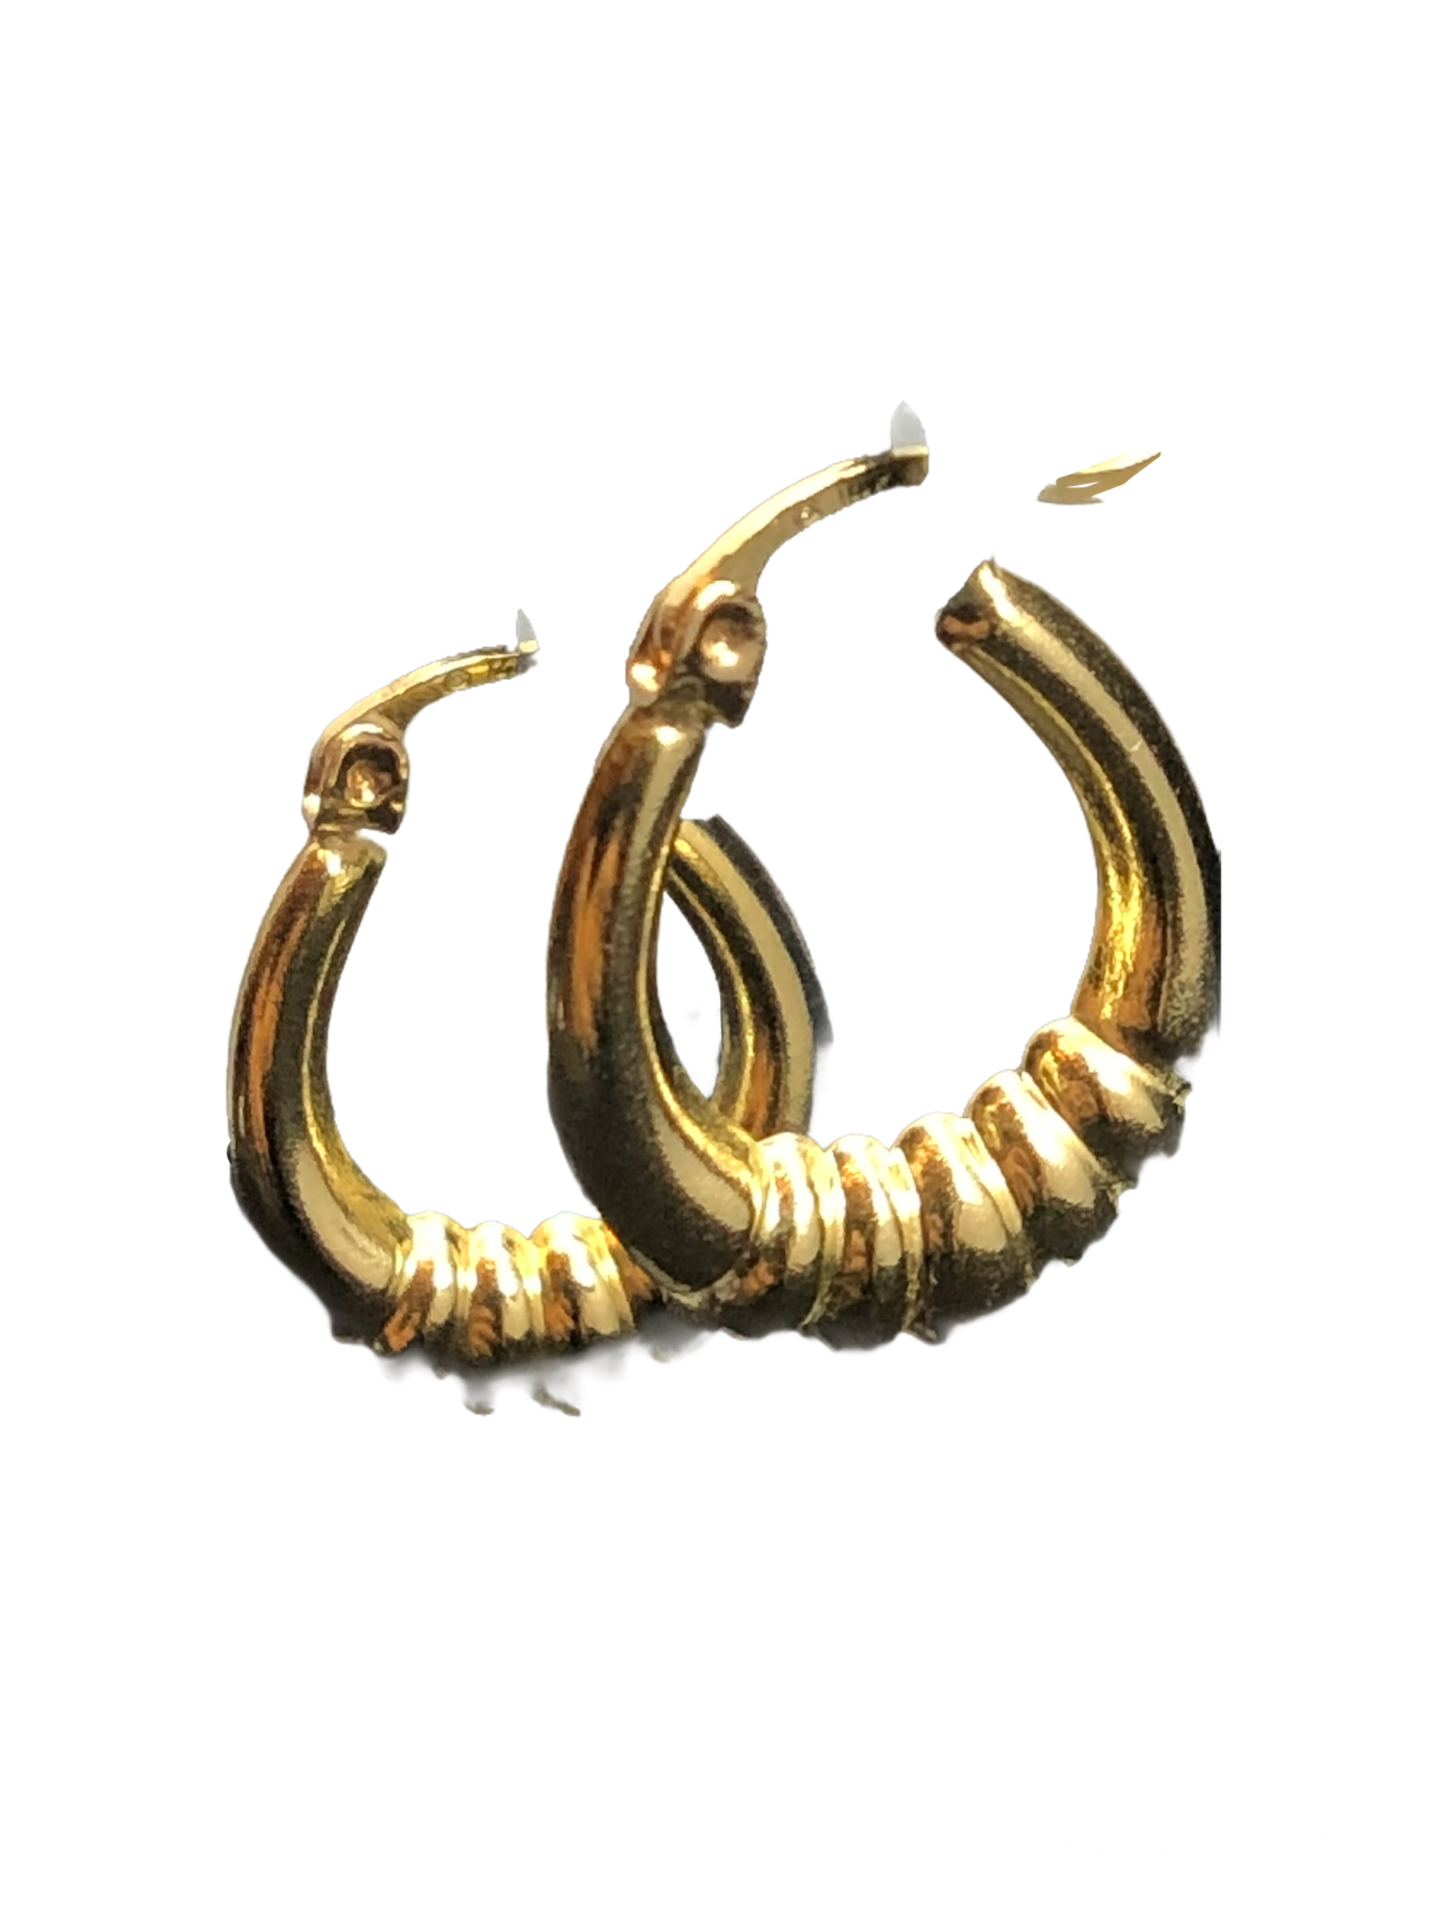 Small Size Hoop Earrings in 14KT Gold - Available in Yellow or White